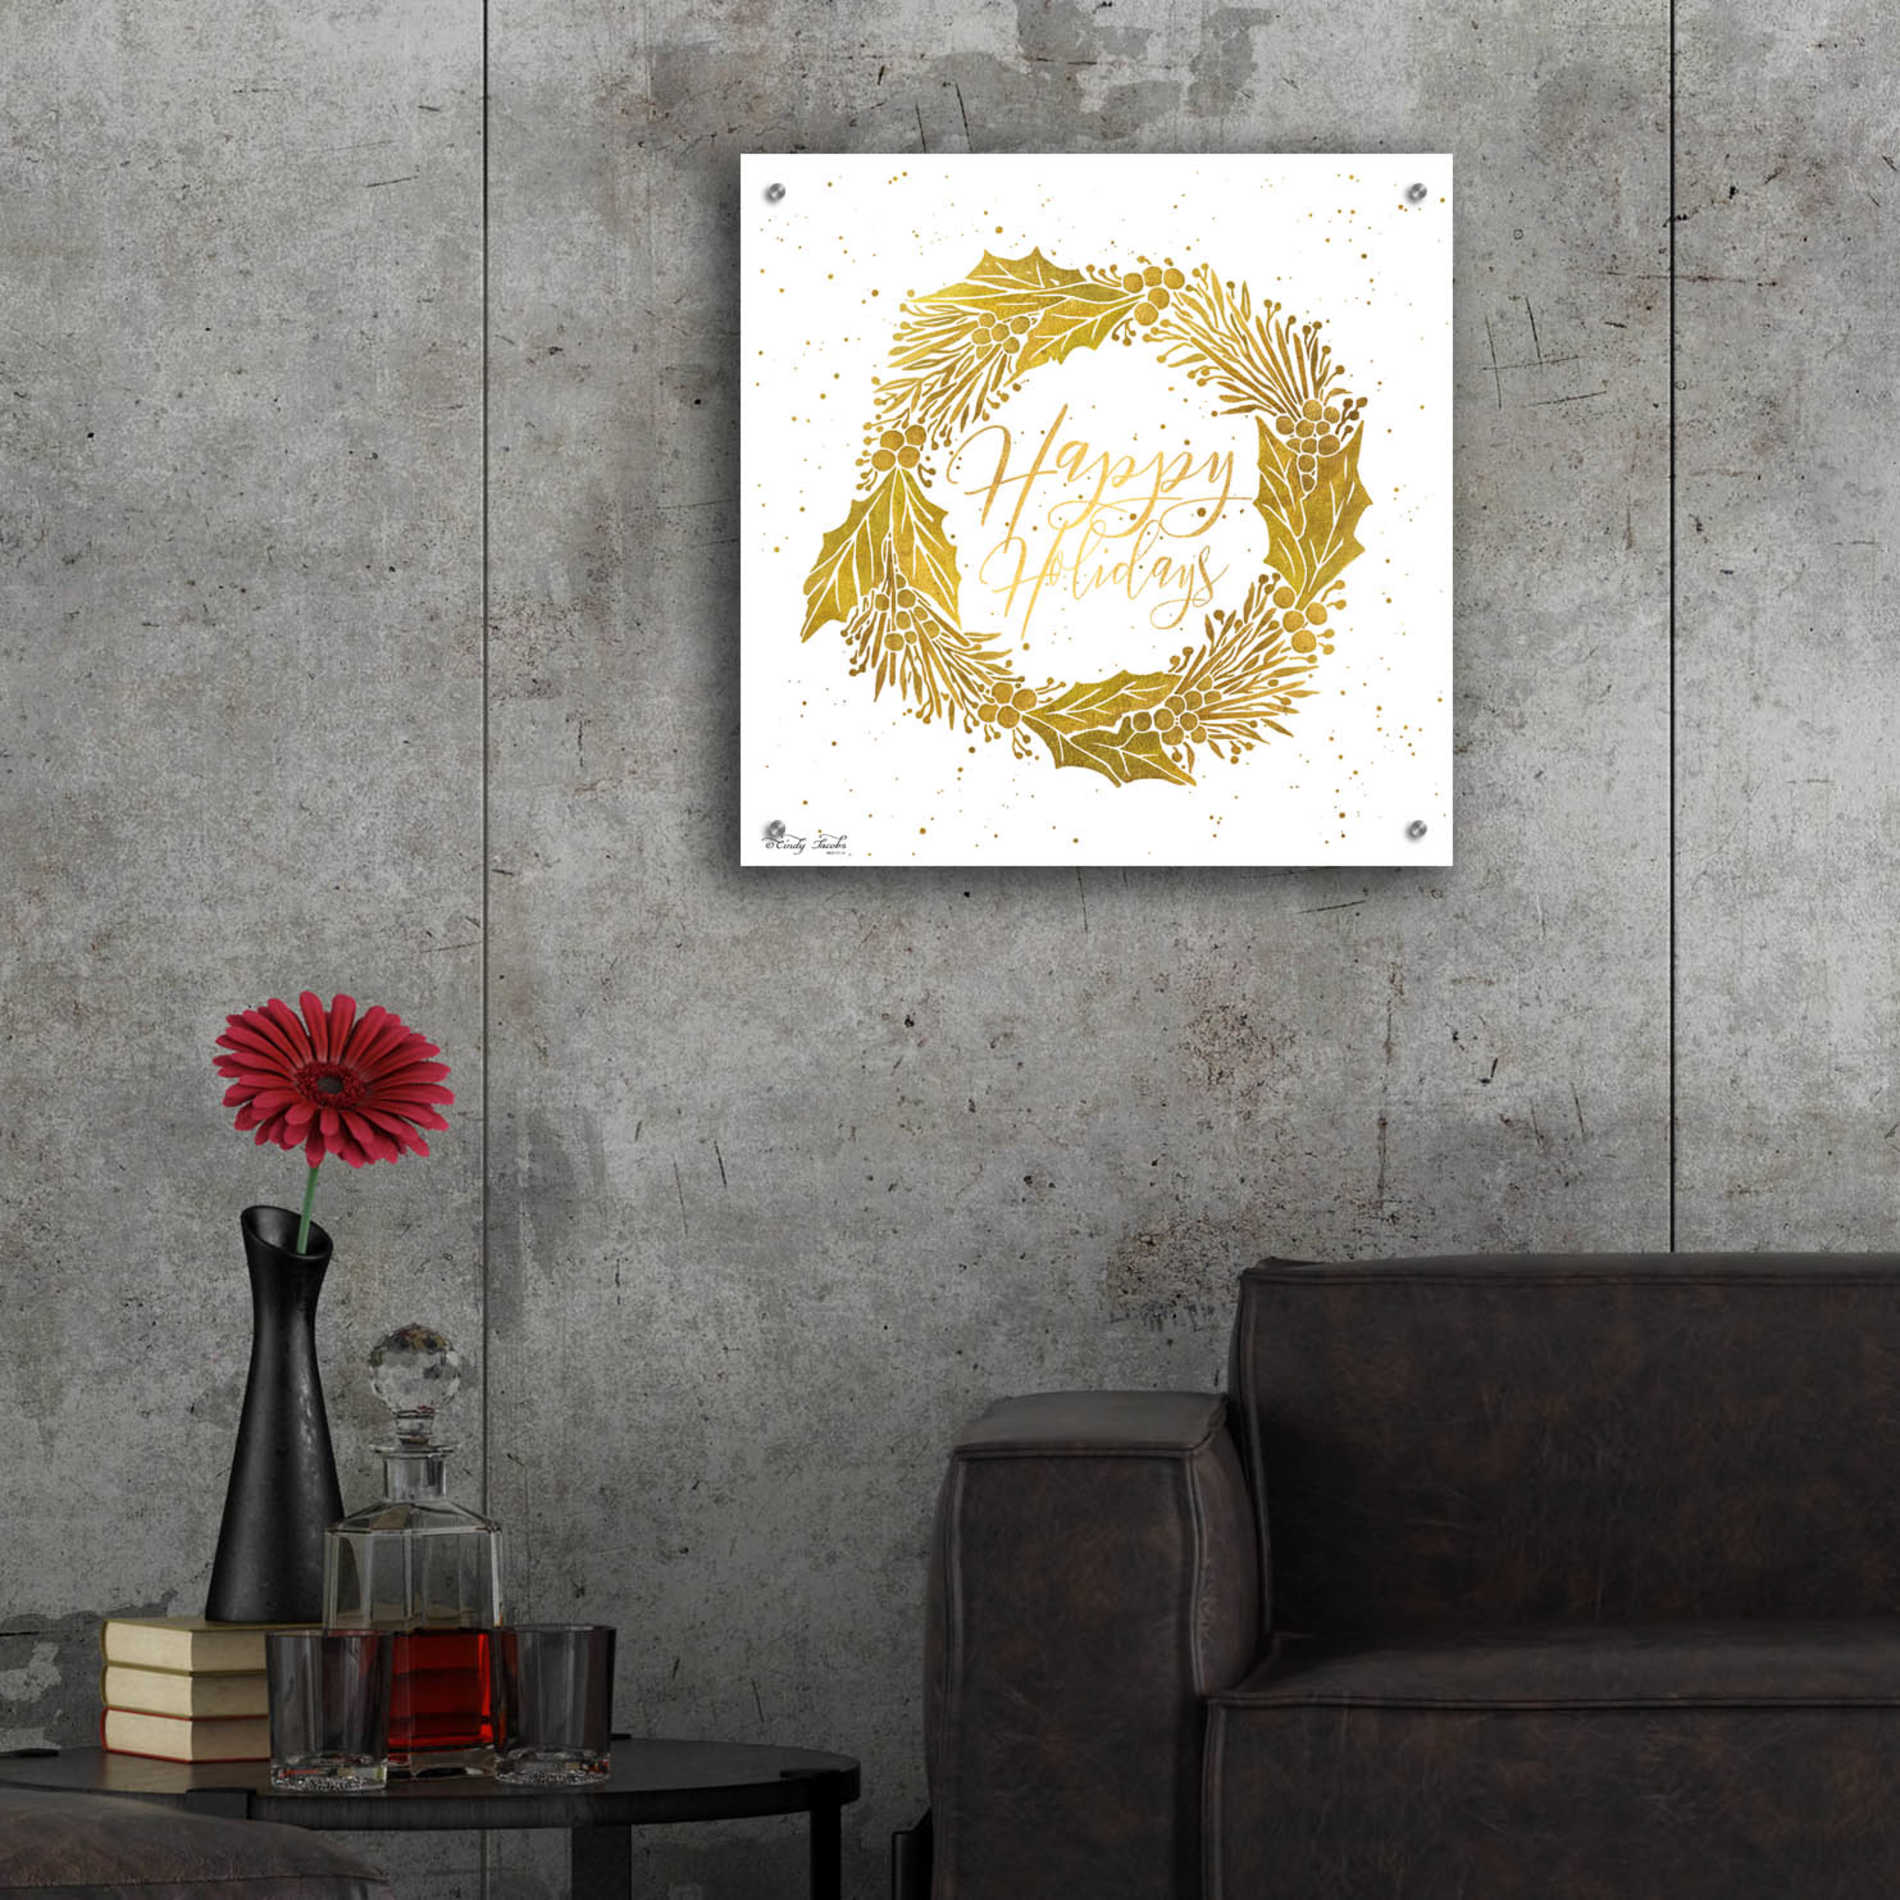 Epic Art 'Happy Holidays Golden Wreath' by Cindy Jacobs, Acrylic Glass Wall Art,24x24